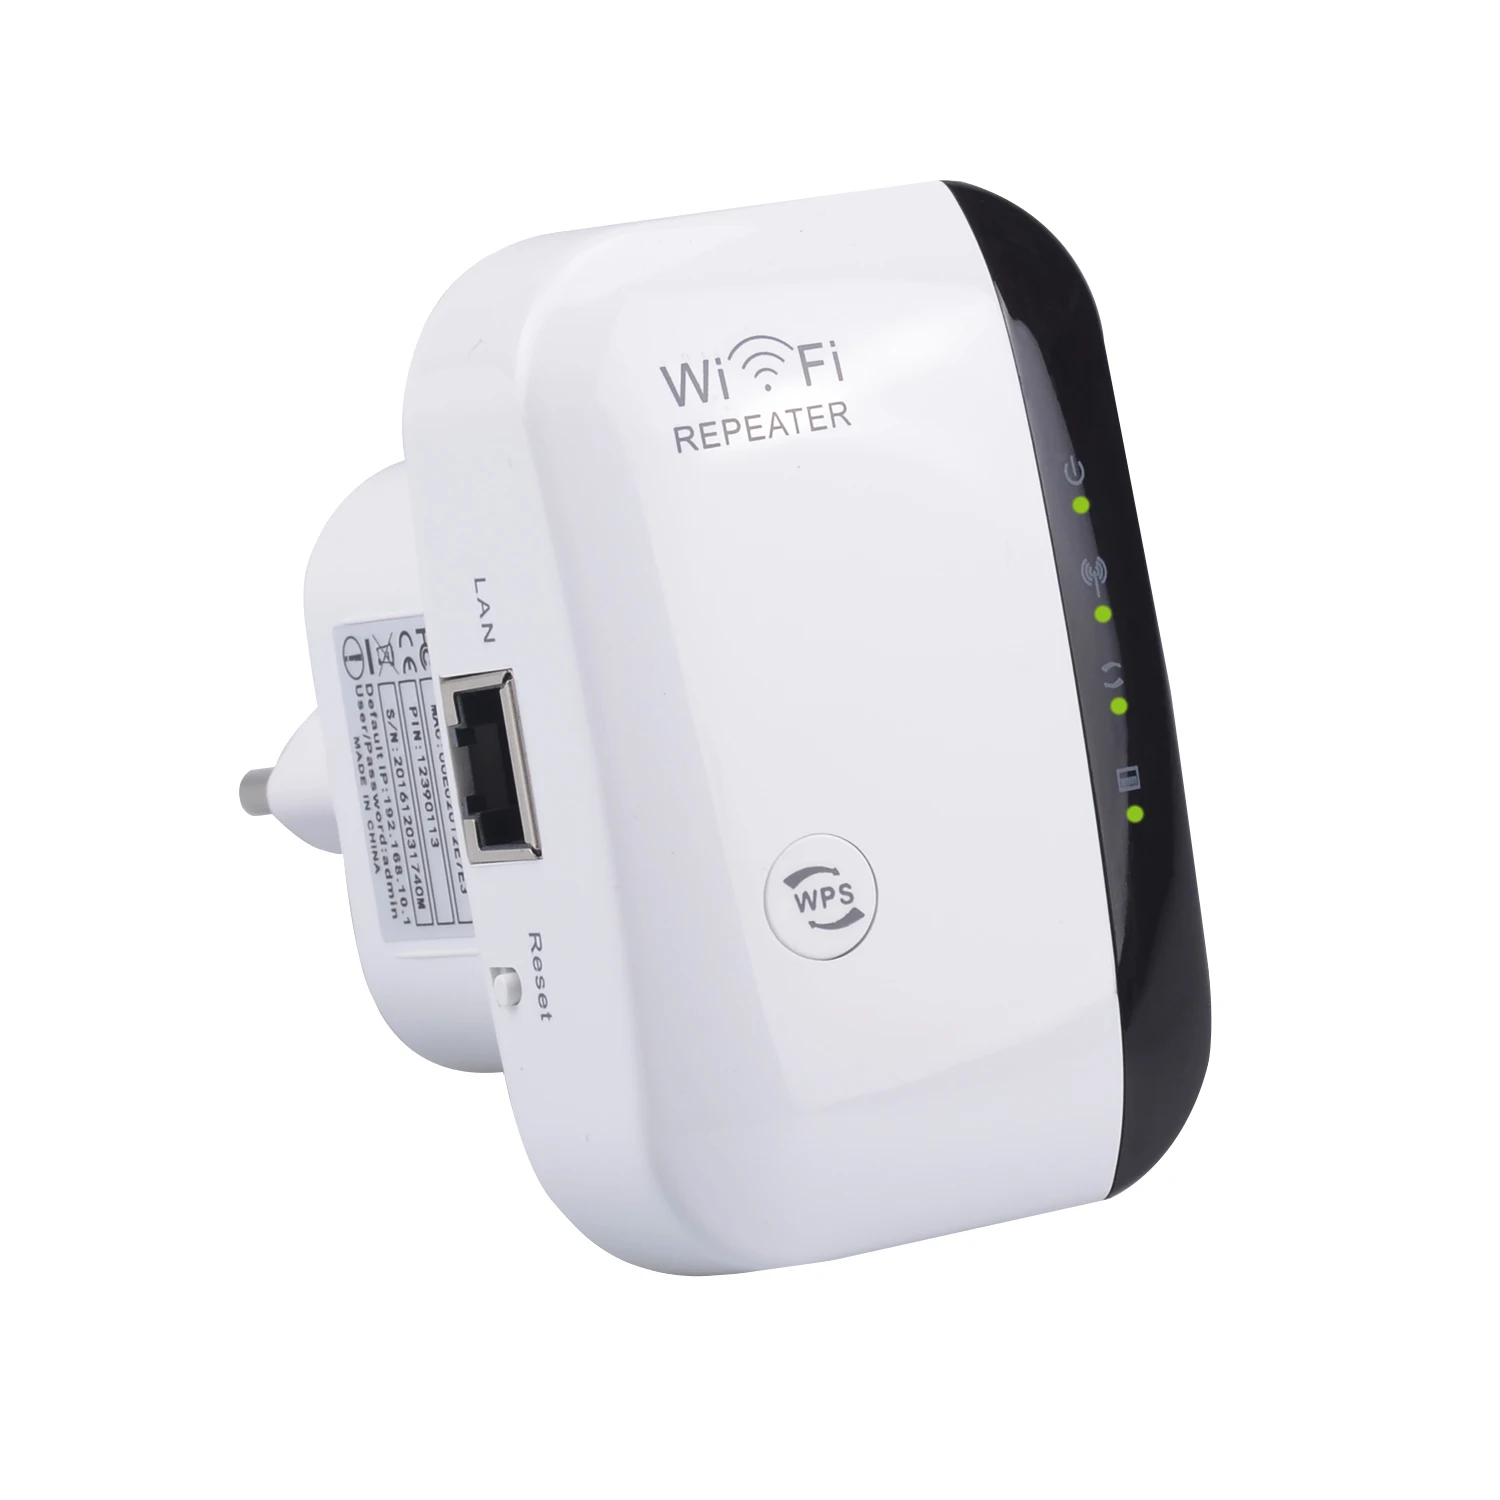 

300Mbps 802.11n/g/b Wireless WiFi Repeater Router Repetidor wi fi Network Range Expander Signal Antennas Booster Extend wi-fi